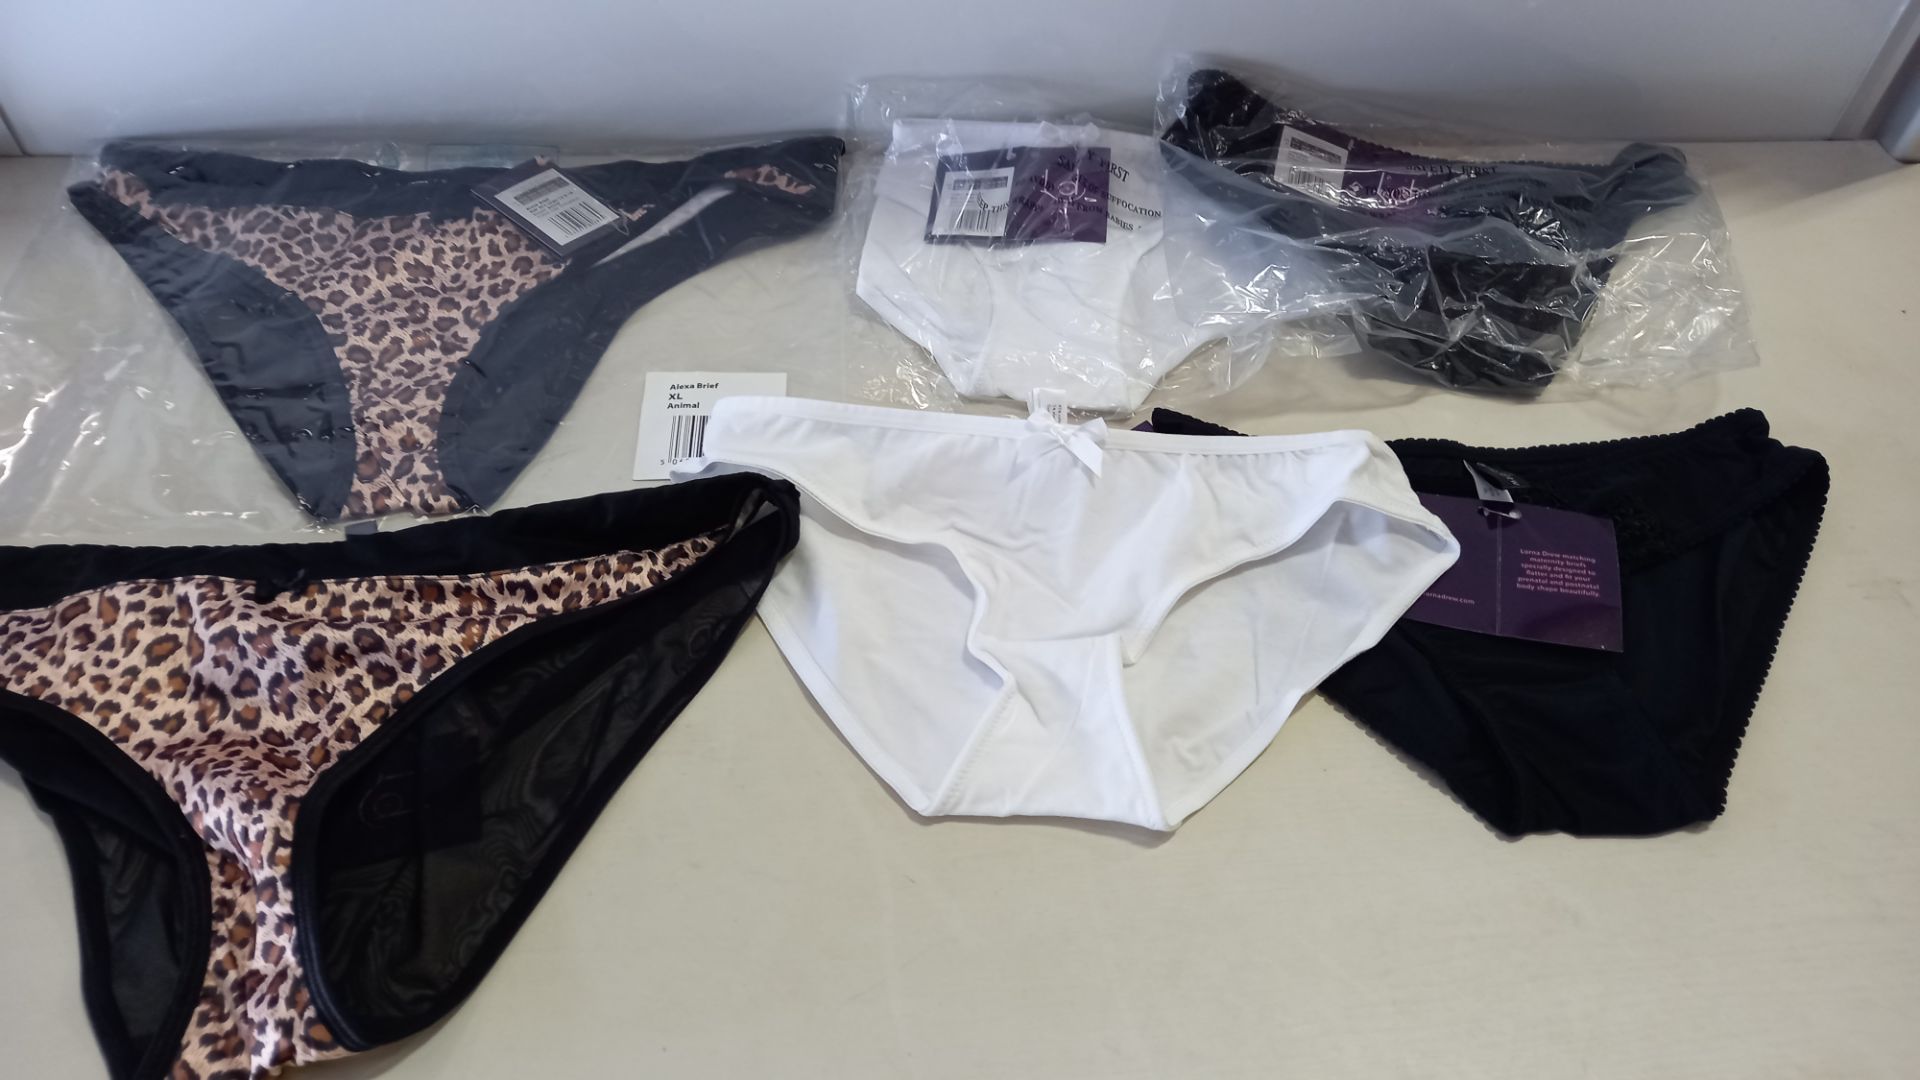 100 PIECE MIXED LORNA DREW NURSING LINGERIE LOT CONTAINING COTTON ROSE BRIEFS SIZE AND ASTRID